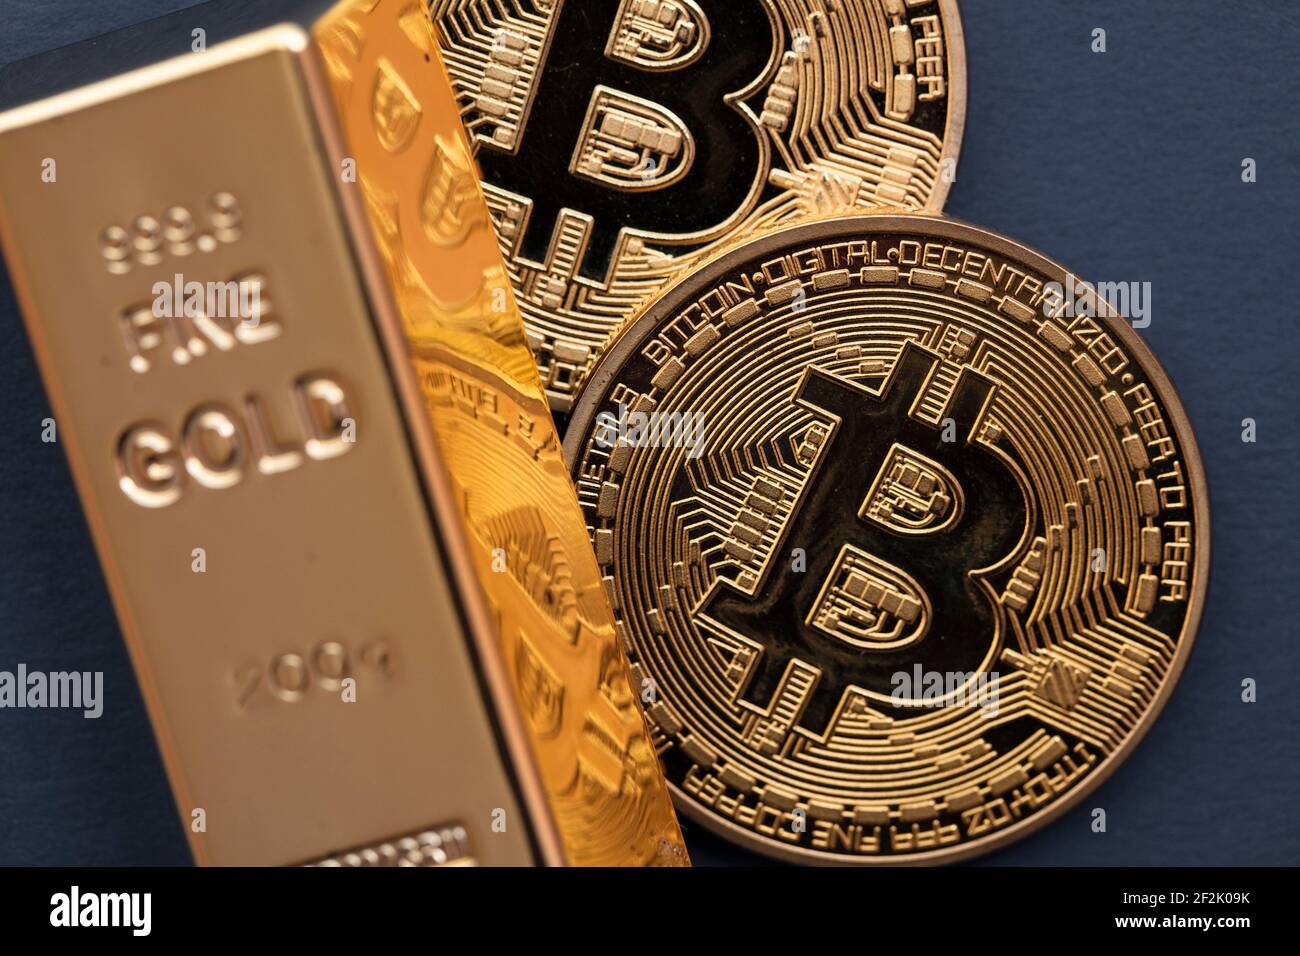 Bullion cryptocurrency top 10 bitcoin investment sites